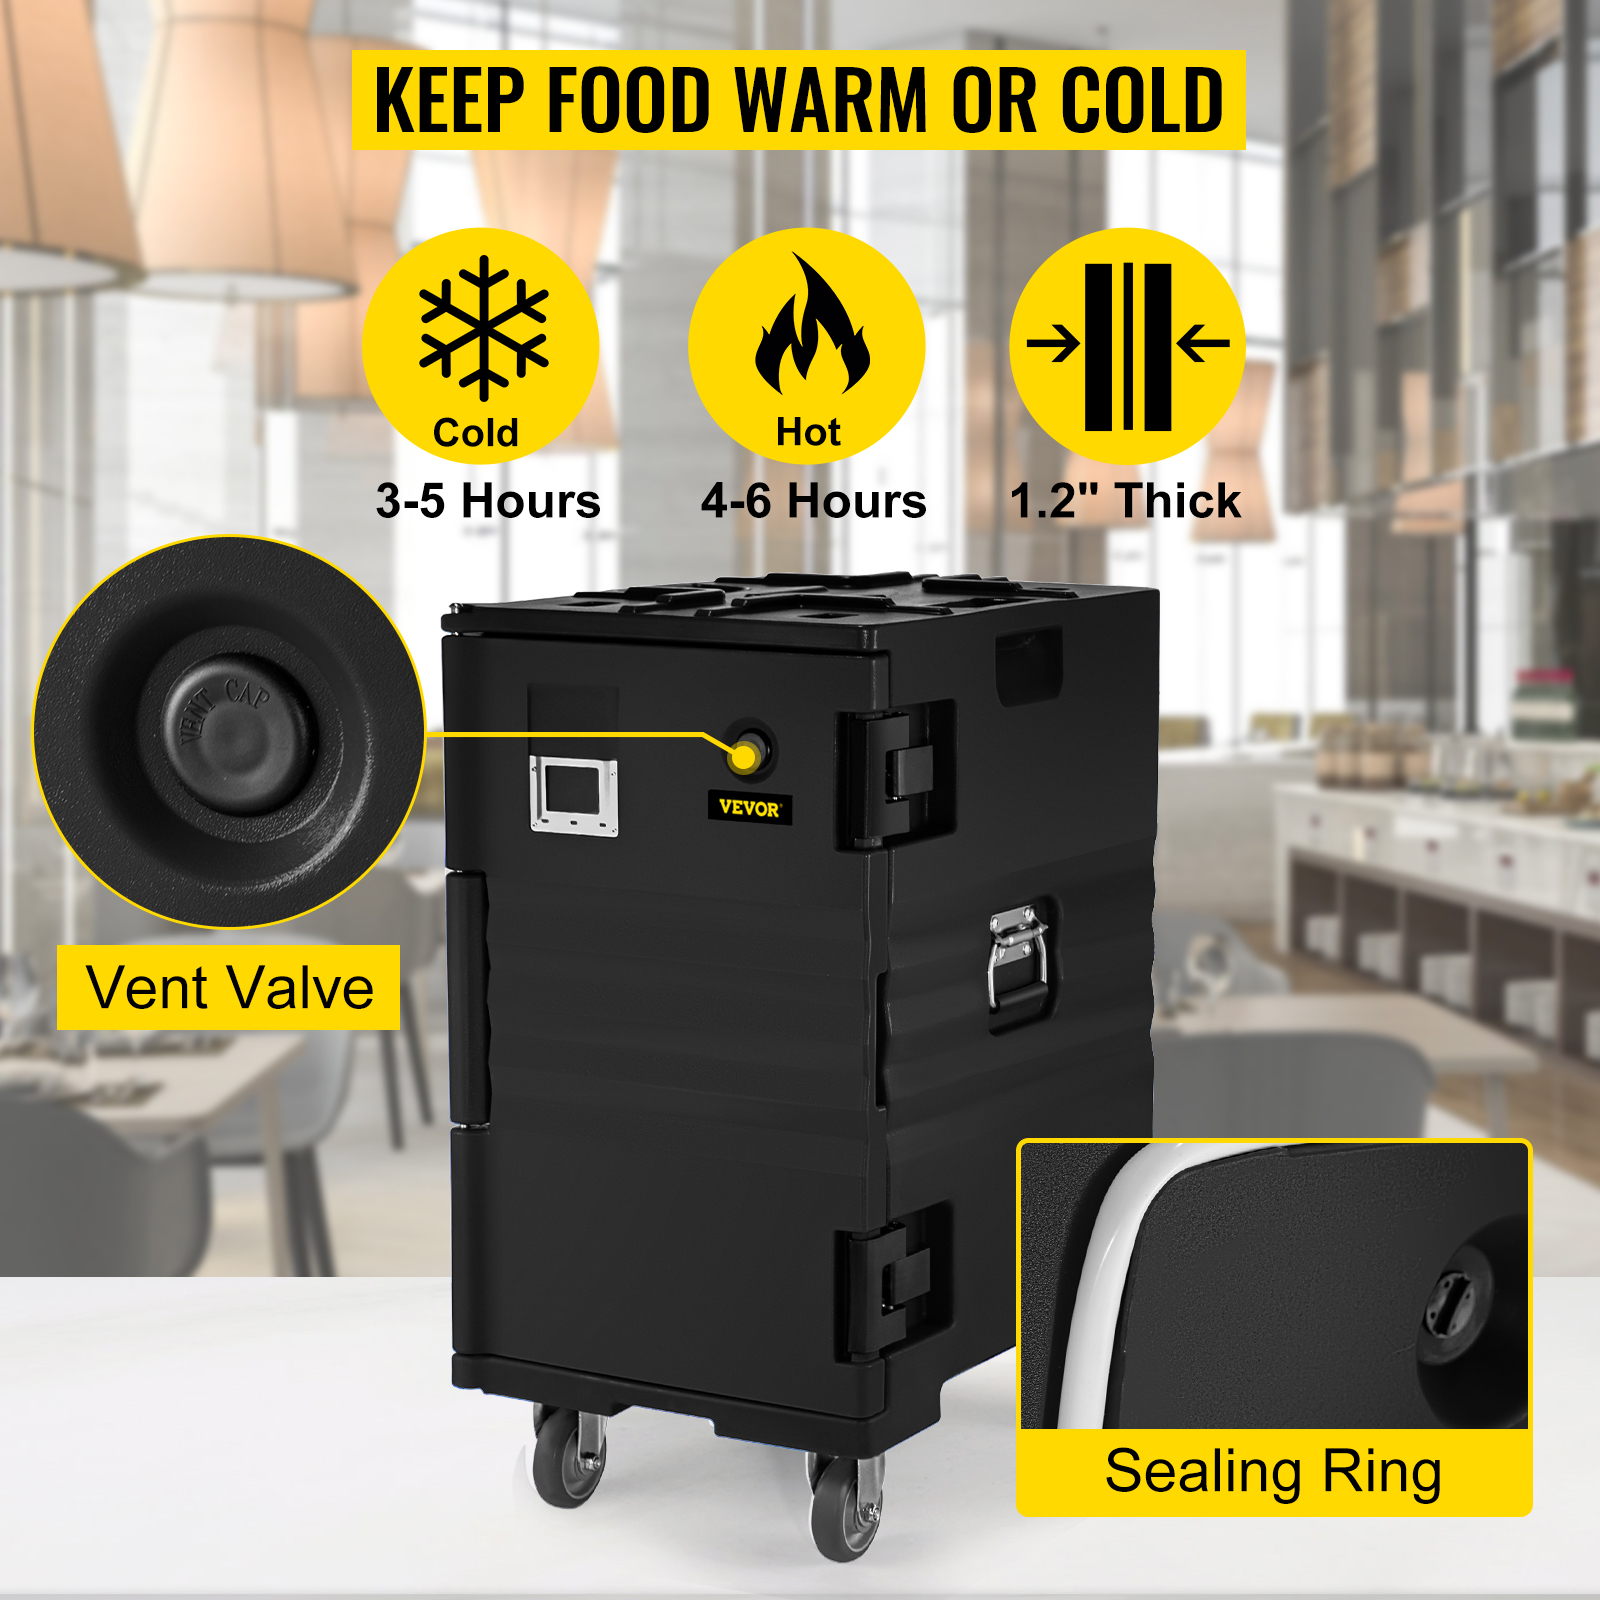 How Do You Keep Food Warm When Catering?